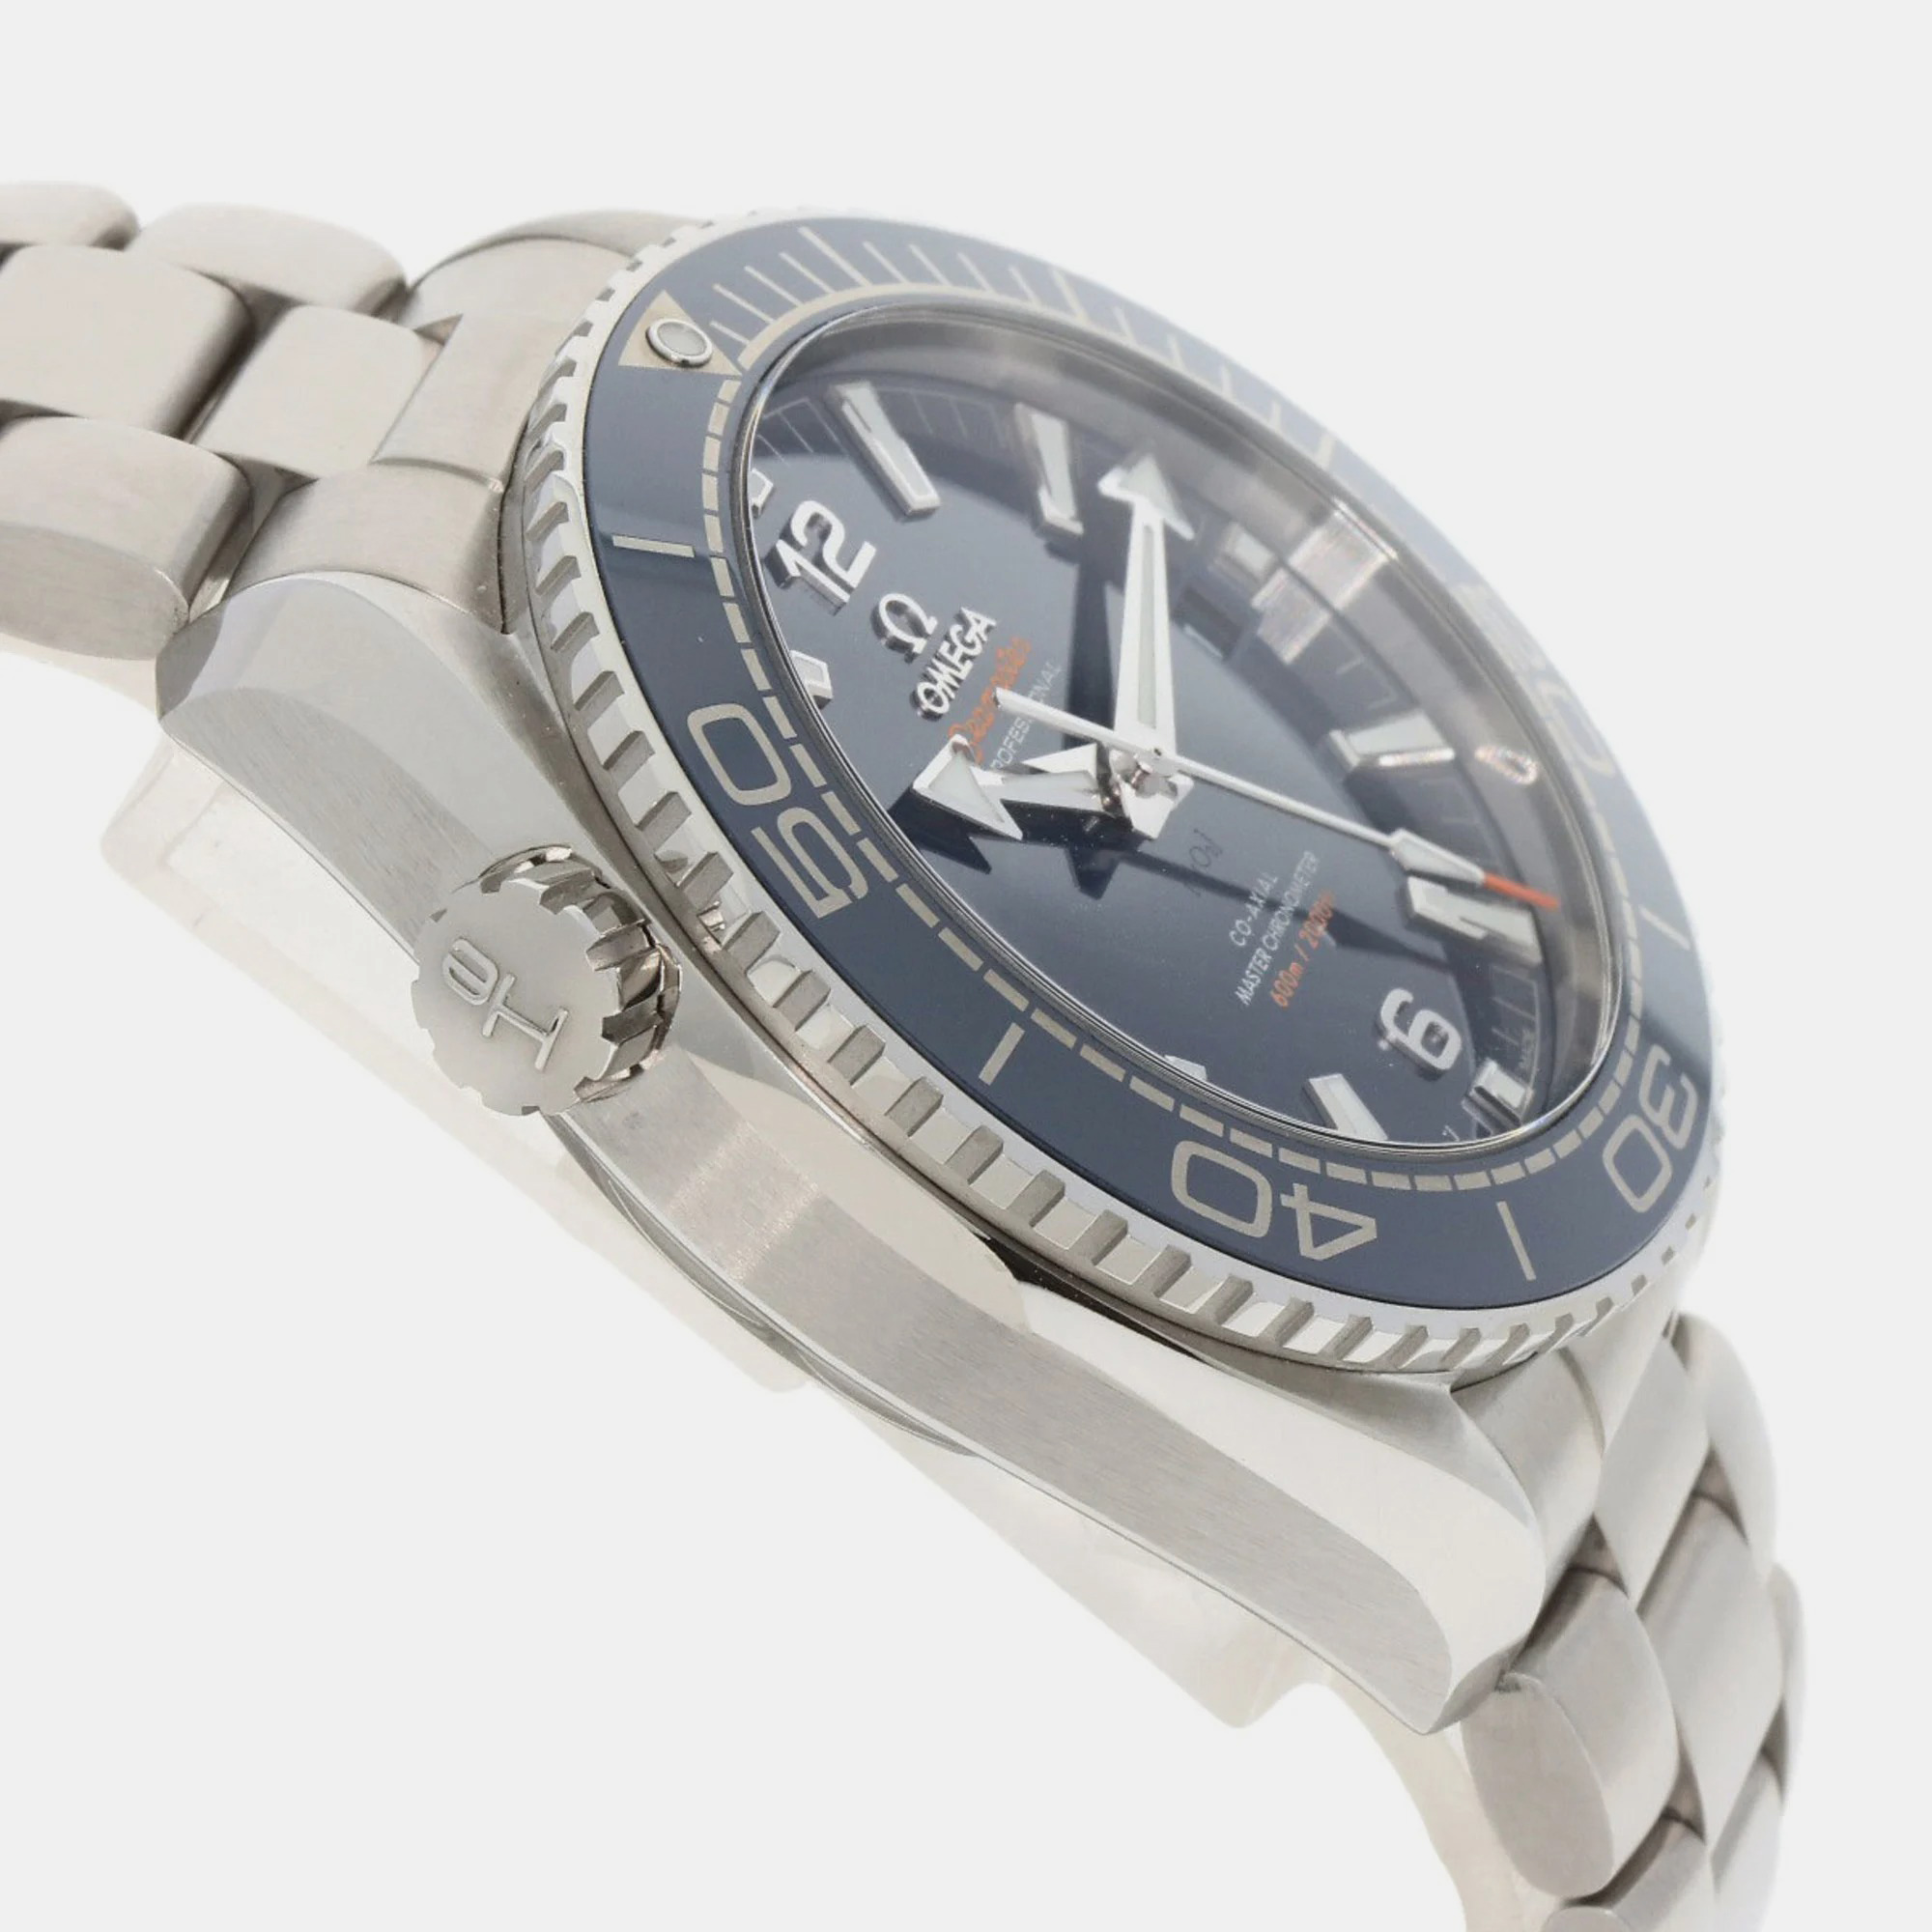 Omega Blue Stainless Steel Seamaster Planet Ocean 215.30.44.21.03.001 Automatic Men's Wristwatch 43.5 Mm